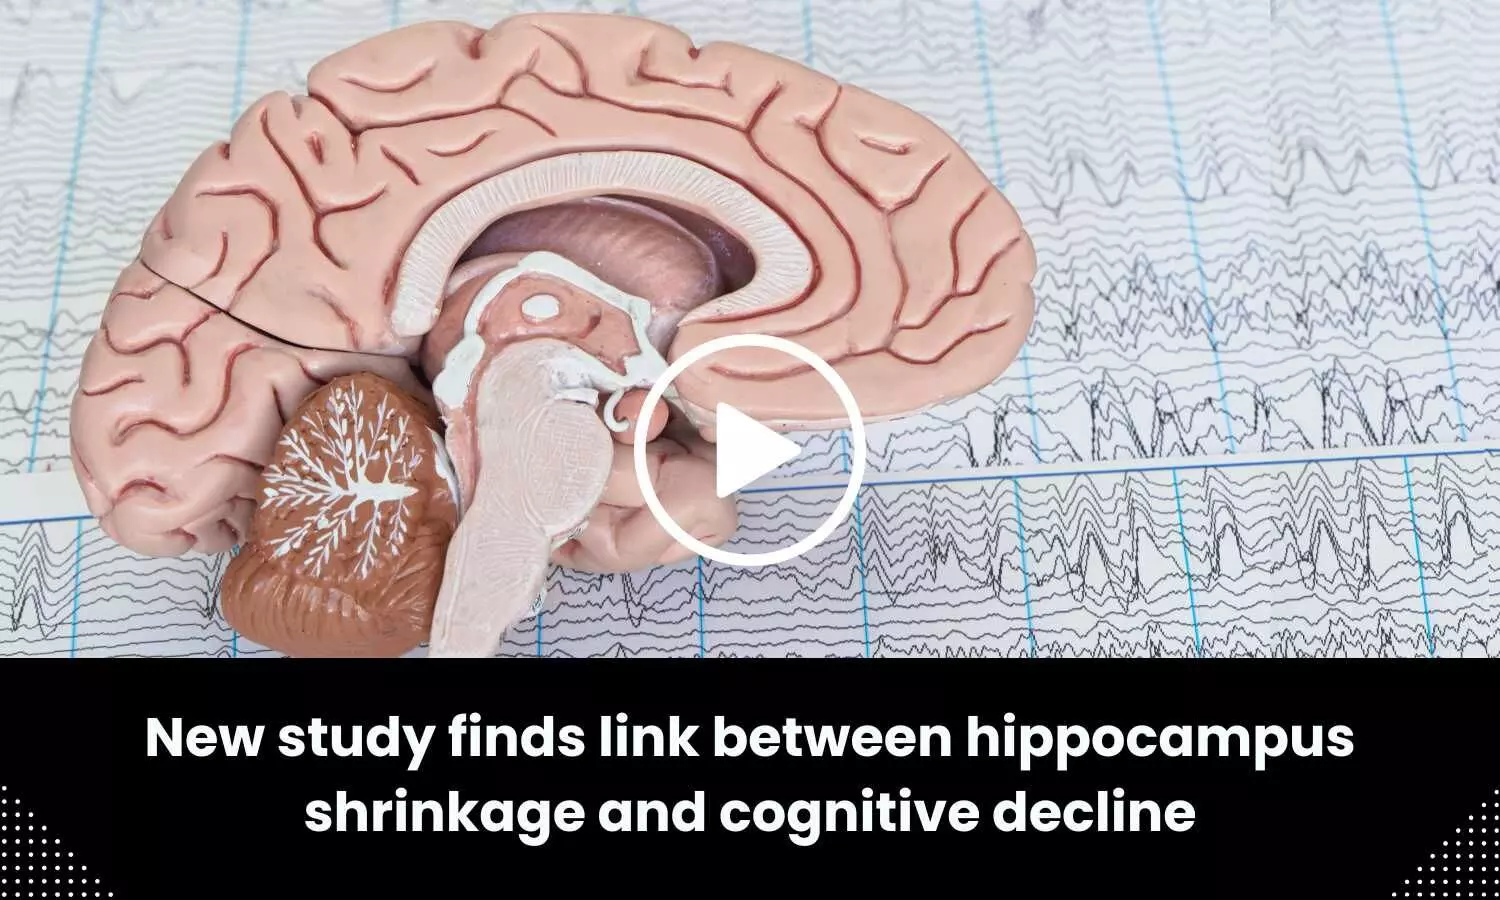 New study finds link between hippocampus shrinkage and cognitive decline